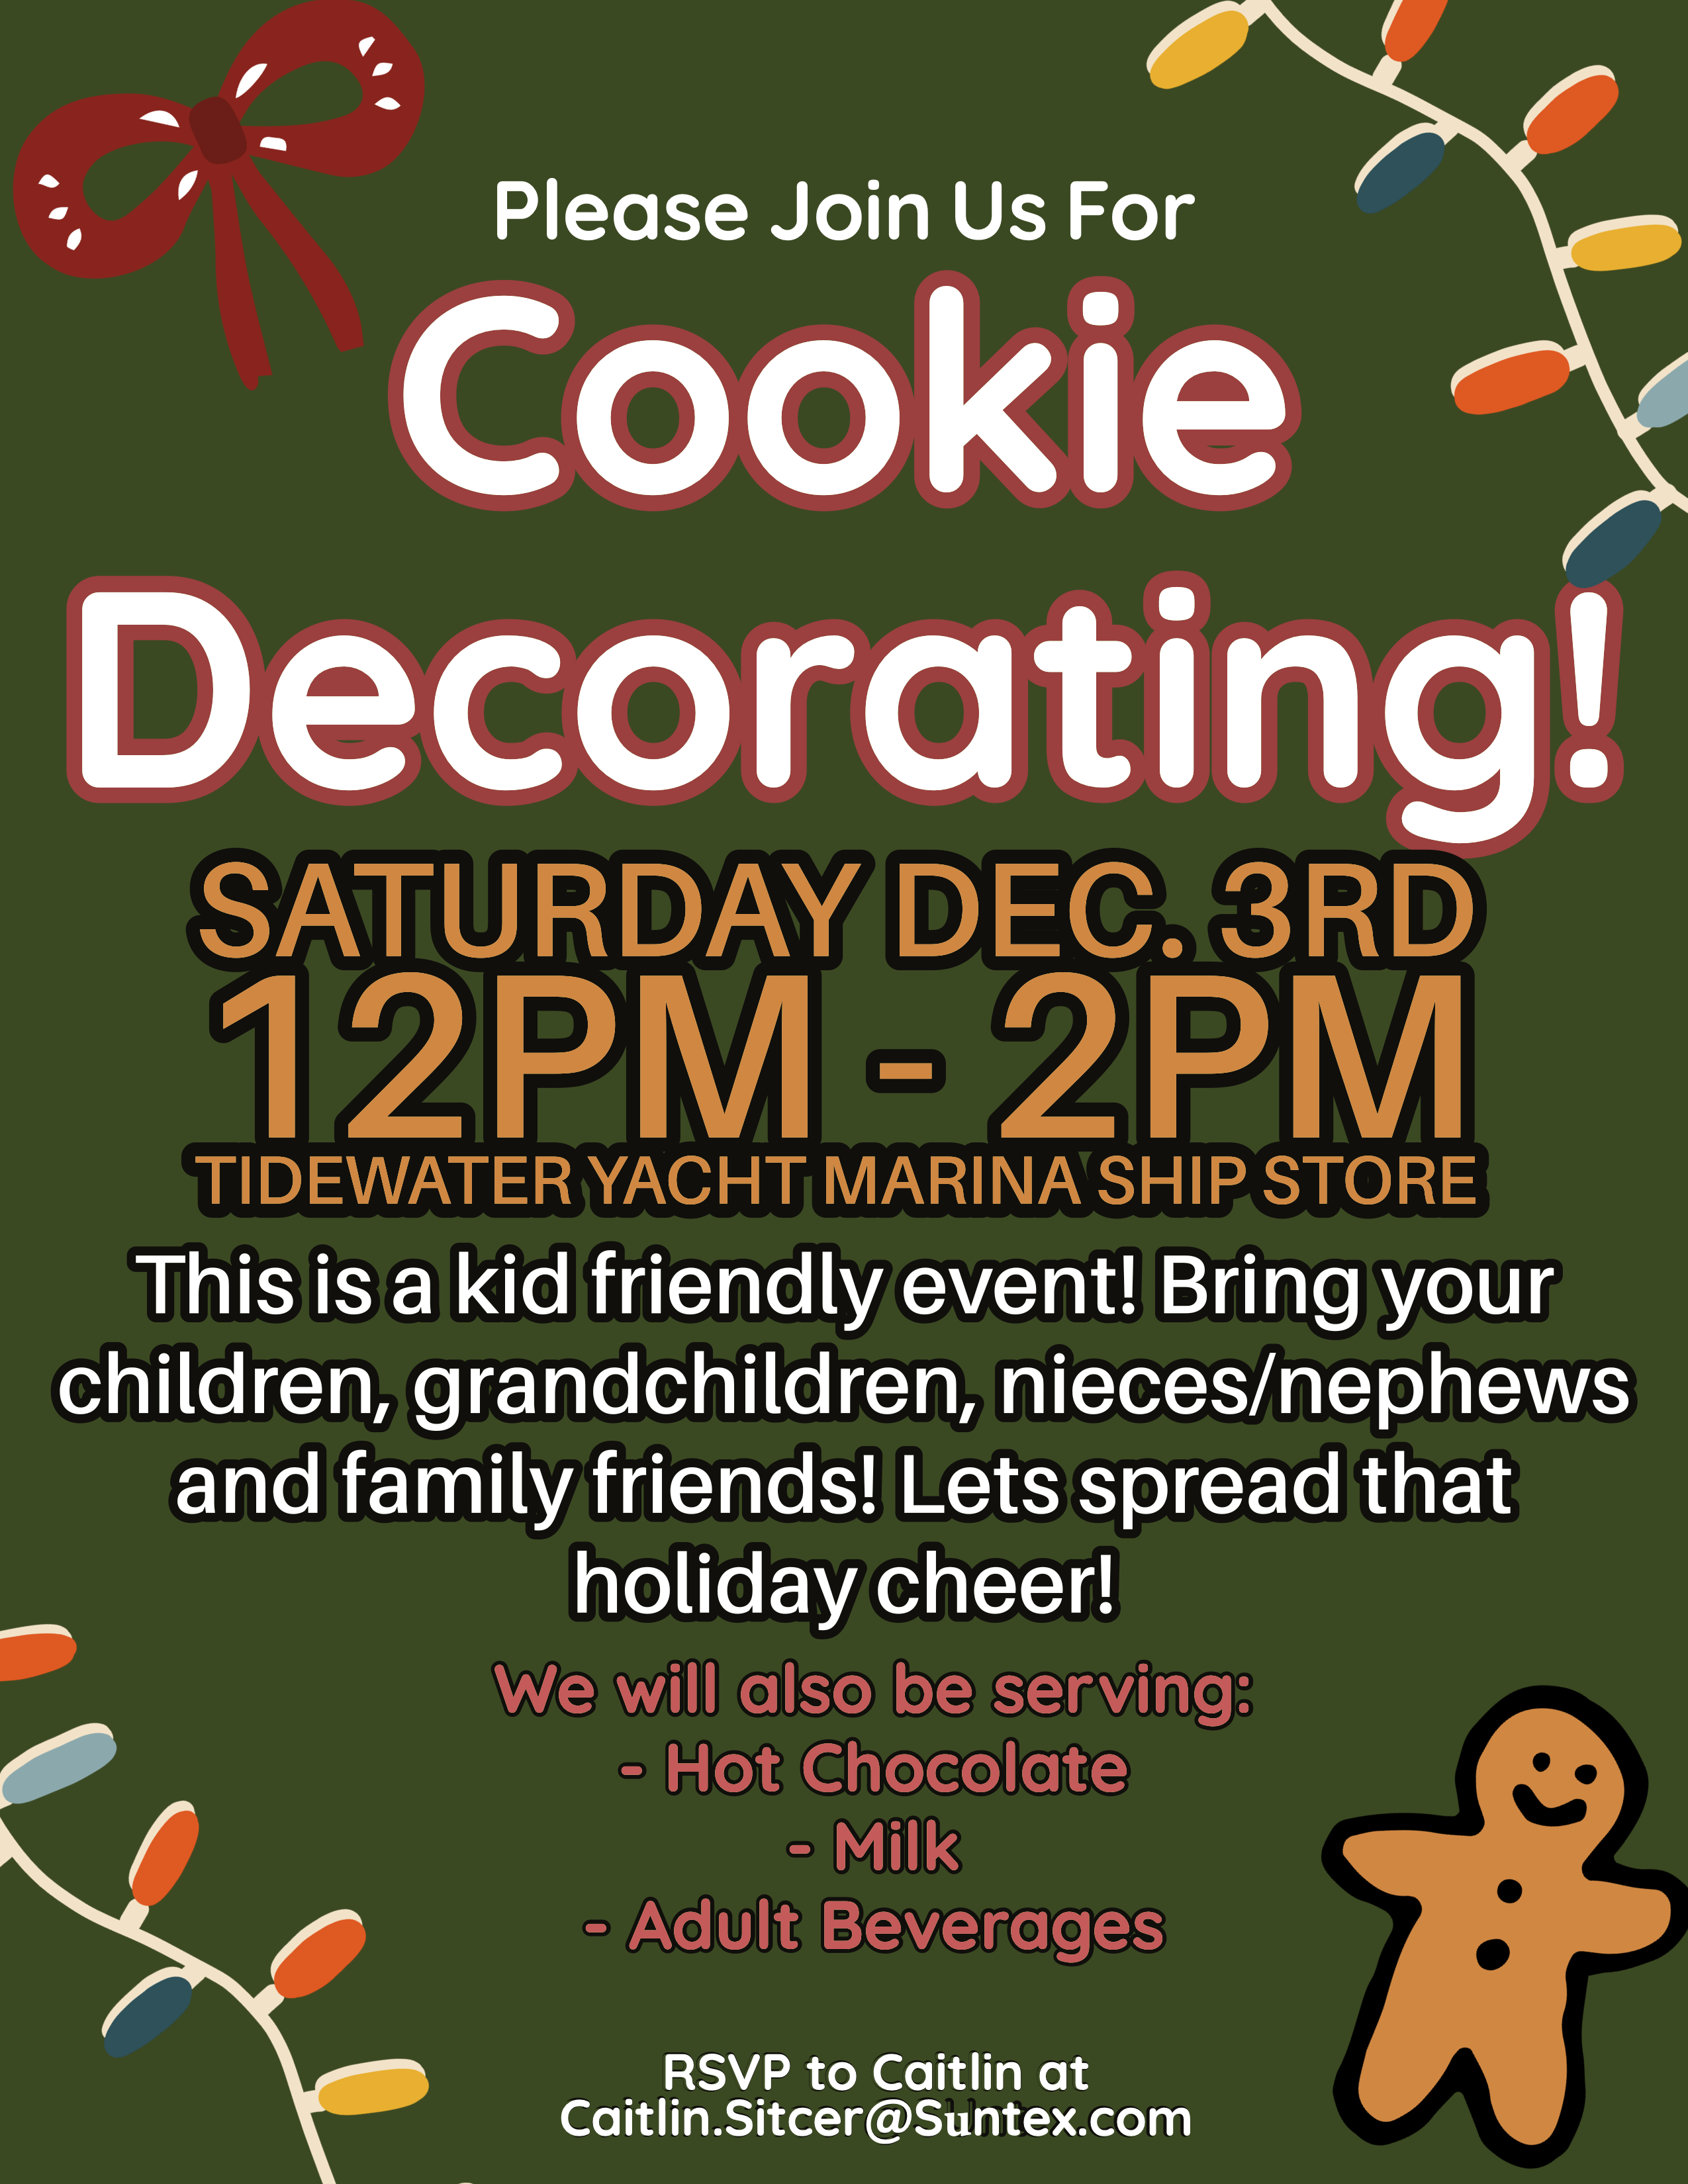 Cookie Decorating Party at Tidewater Yacht Marina